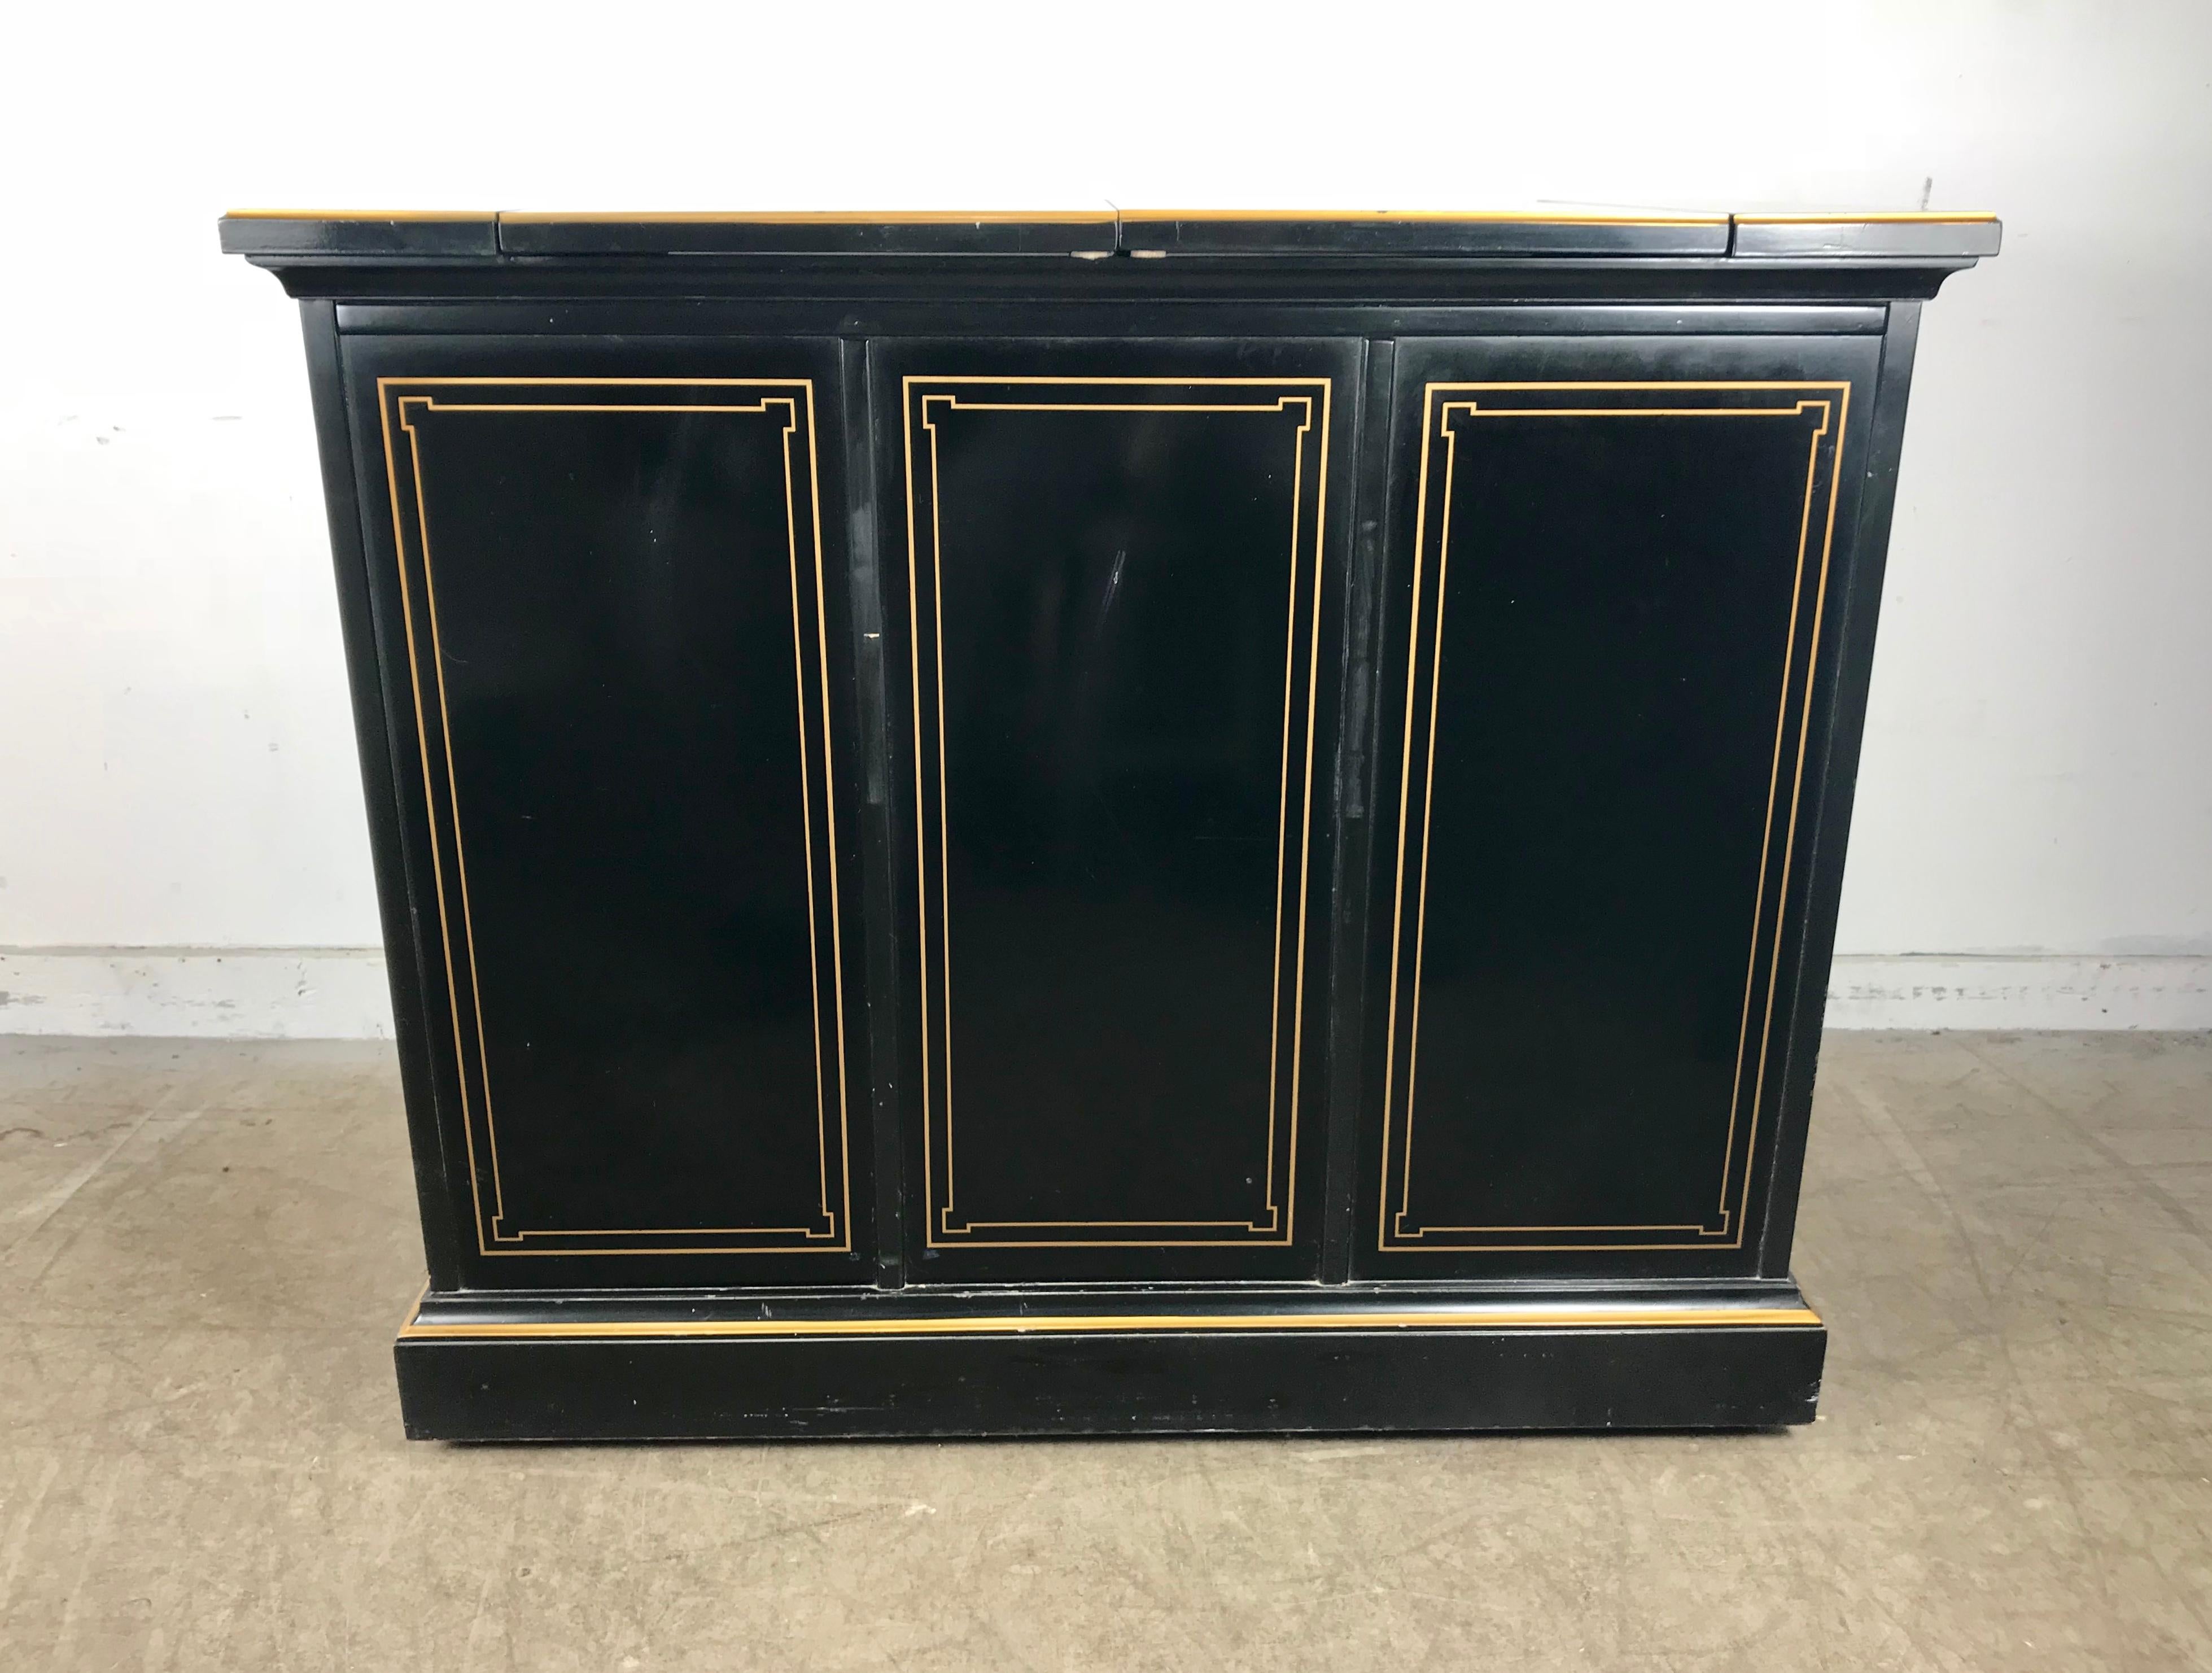 Asian modern rolling bar cabinet by Drexel, black lacquer dry bar/liquor cabinet is decorated with gold gilt trim and hand painted details, including scenes of people in natural settings, pagodas, and flowers.
Top folds out to nearly double the